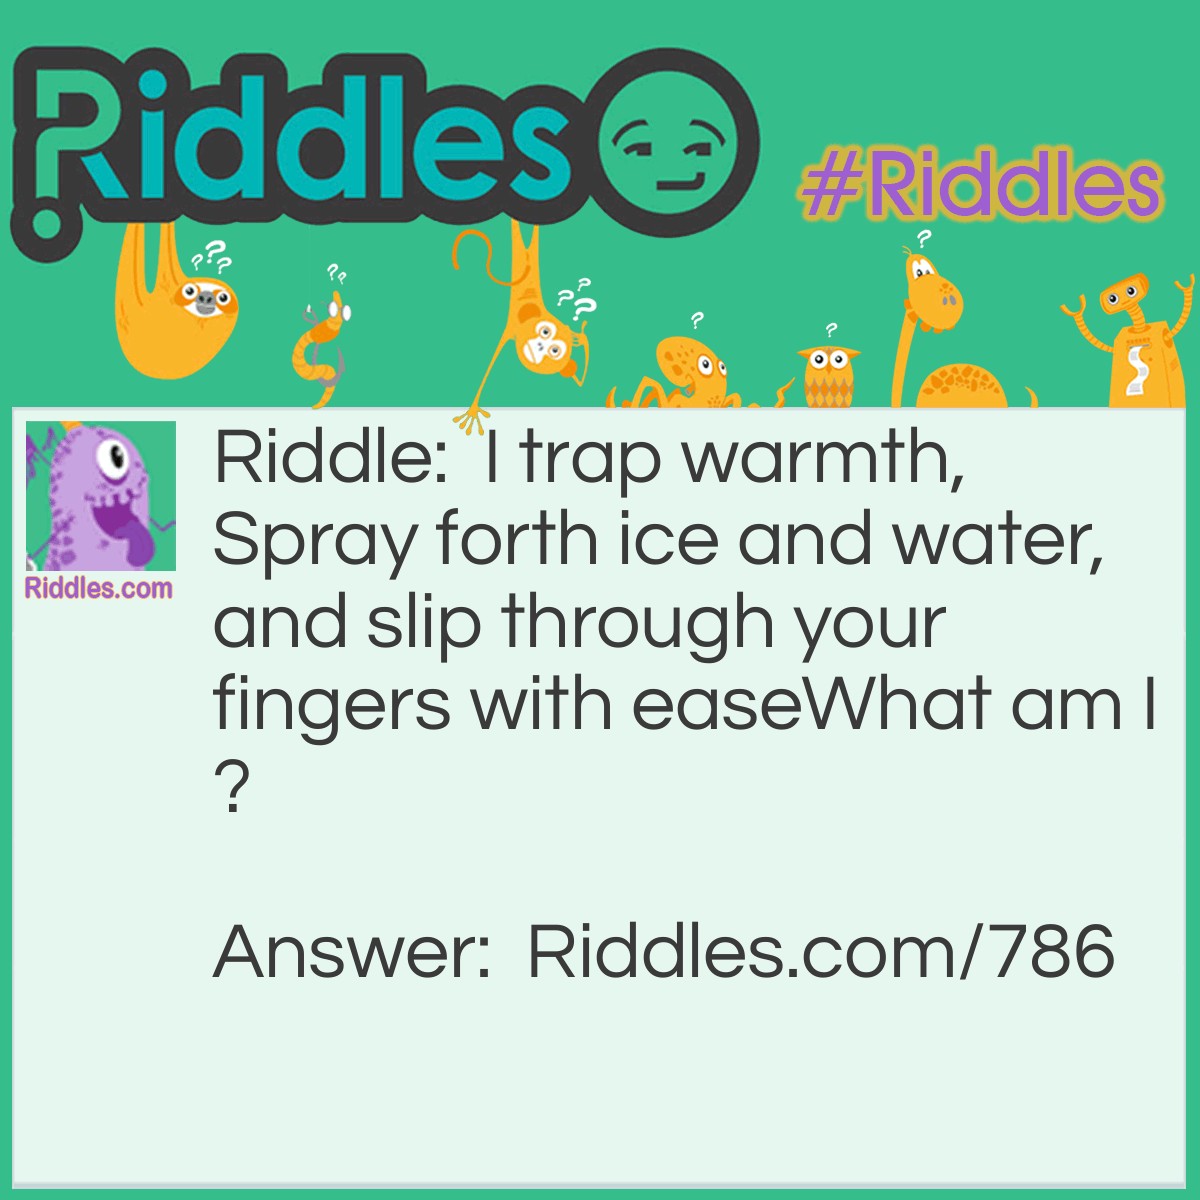 Riddle: I trap warmth, Spray forth ice and water, and slip through your fingers with ease
What am I? Answer: Clouds.